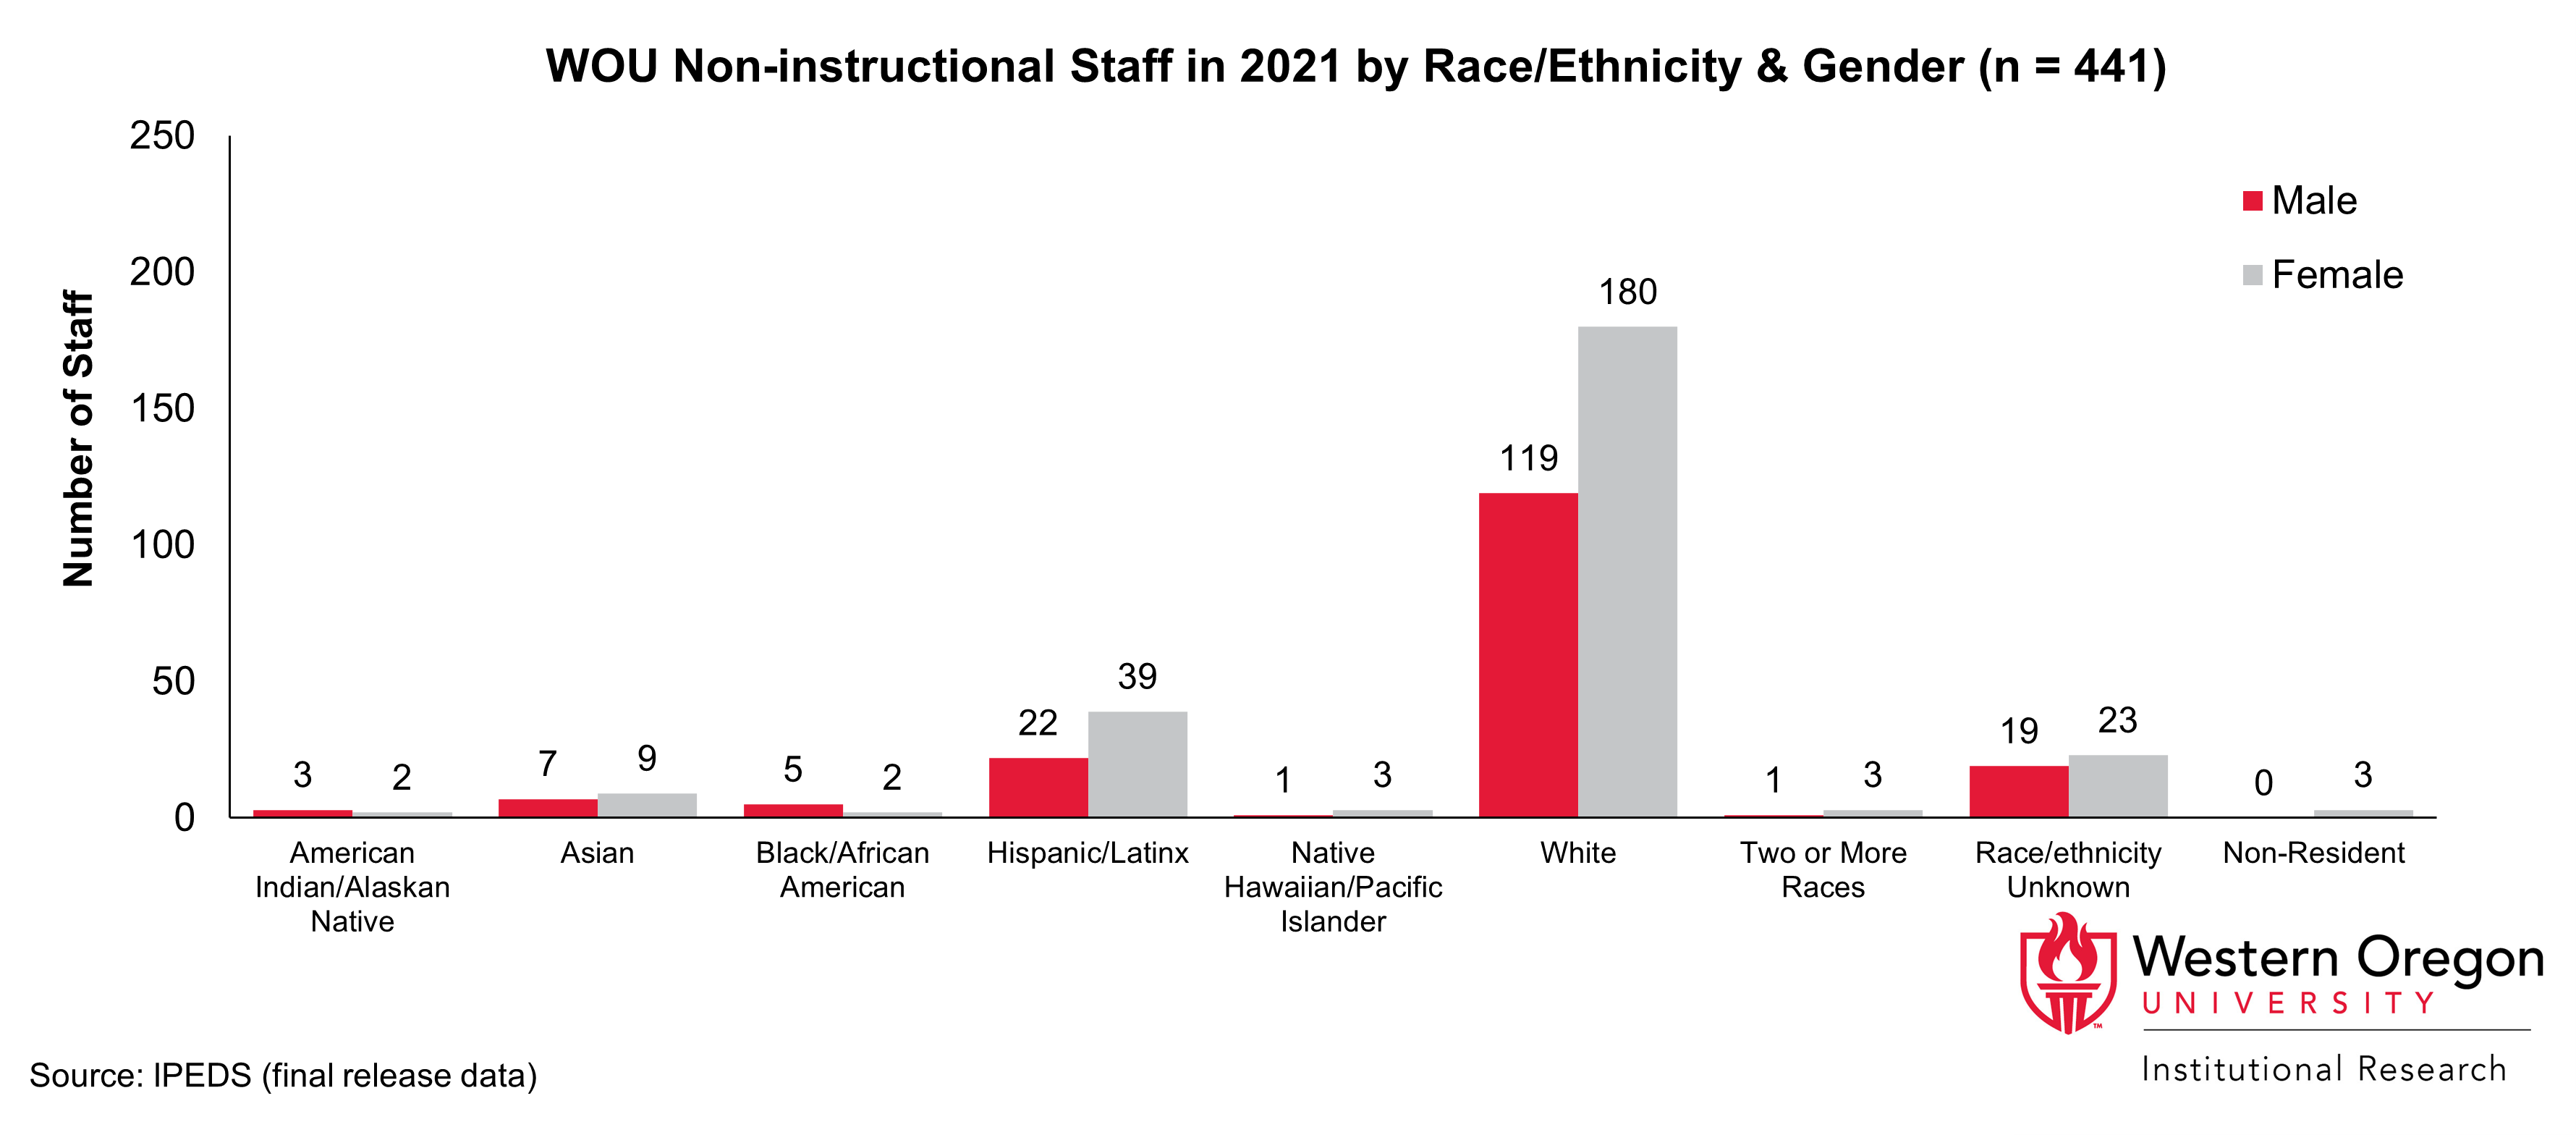 Bar graph of counts for staff at WOU in the most recent year, broken out by race/ethnicity categories and gender, showing that female staff outnumber male staff